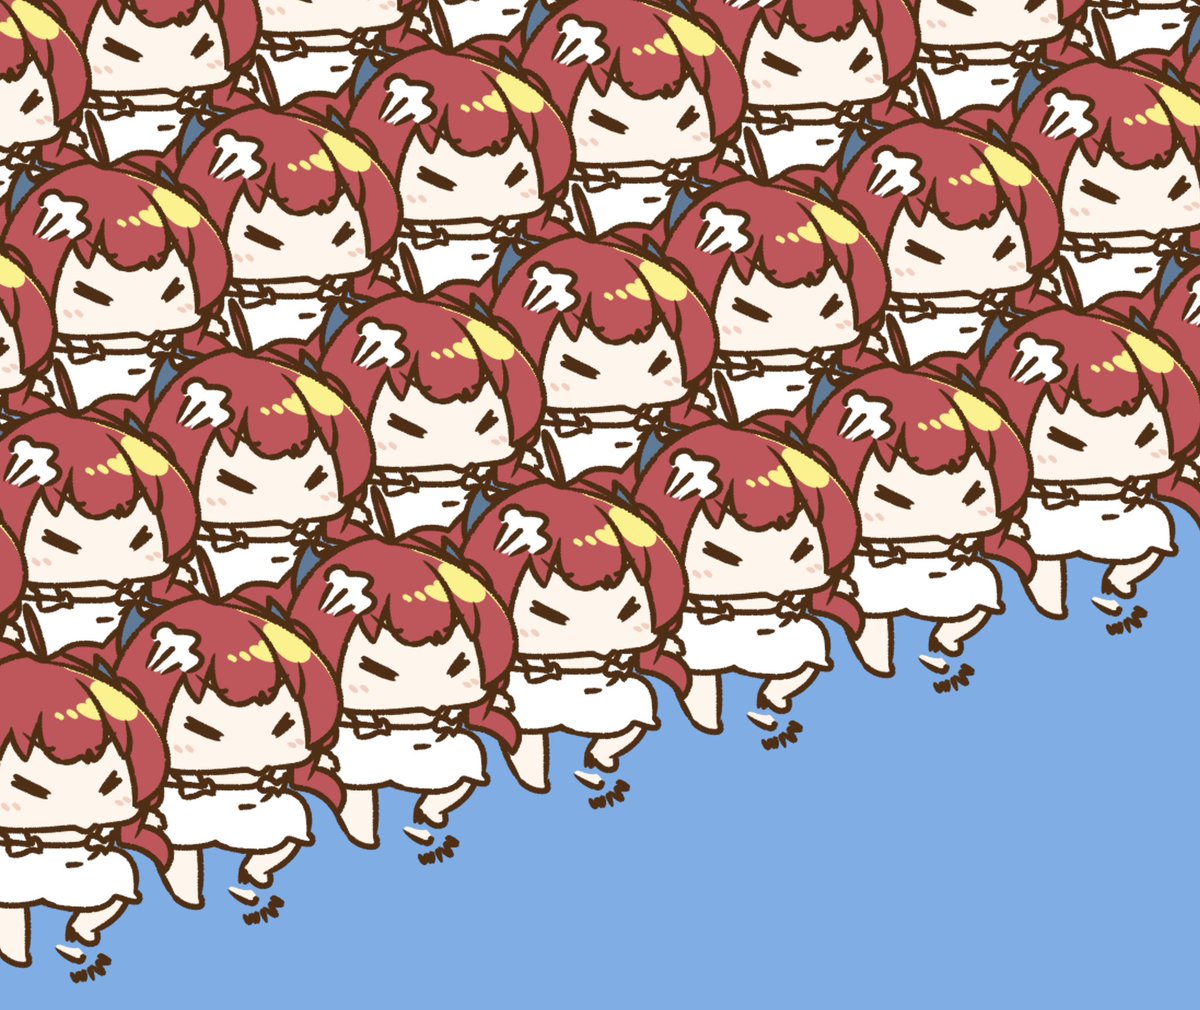 6+girls clone multiple girls chibi red hair twintails closed eyes  illustration images